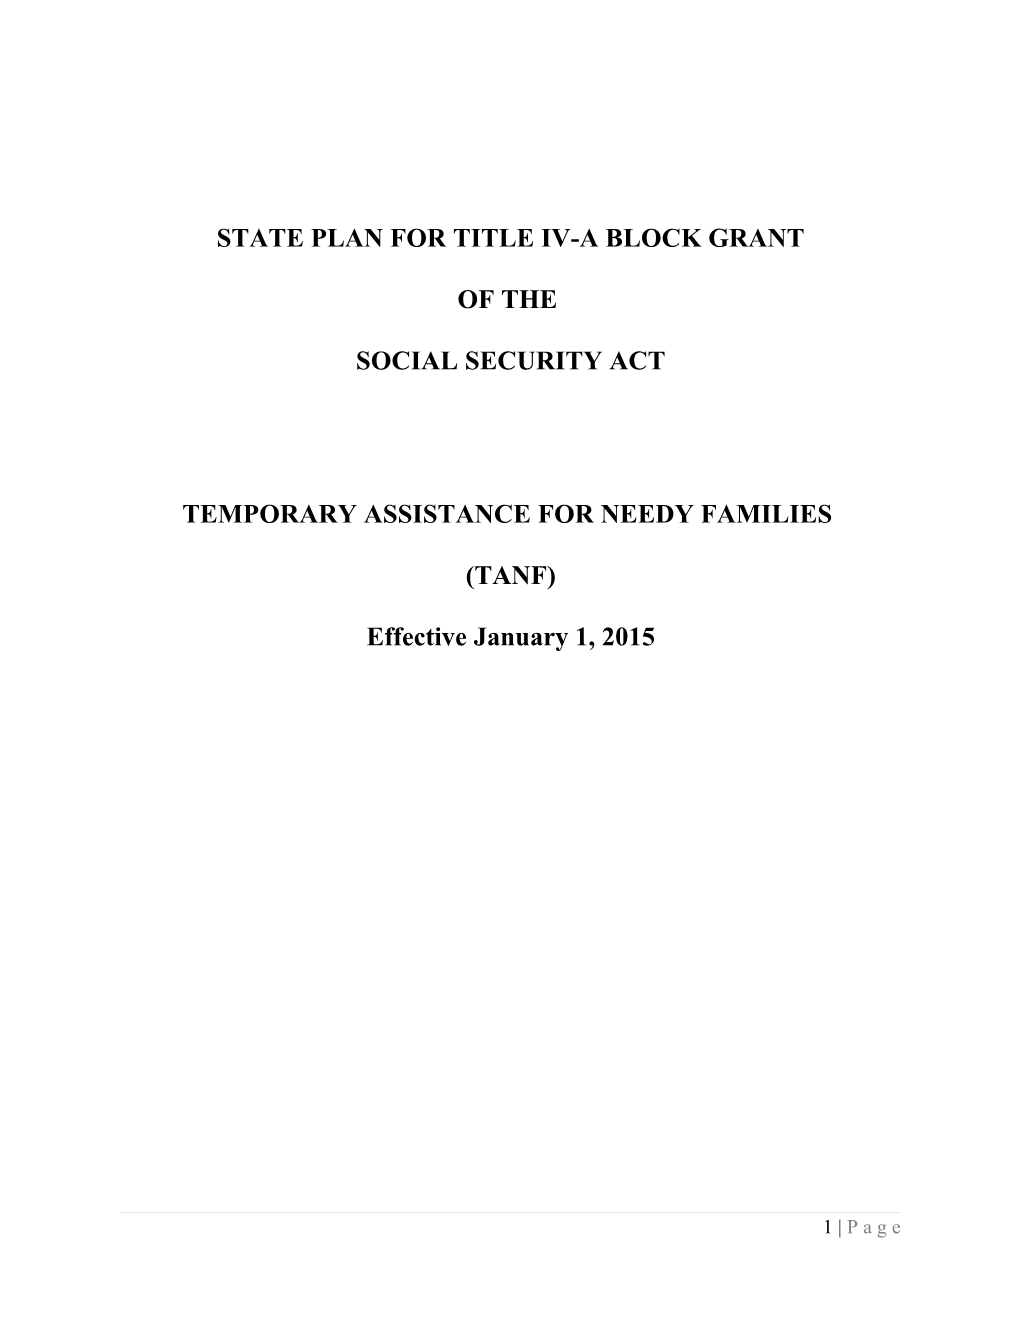 State Plan for Title Iv-A Block Grant